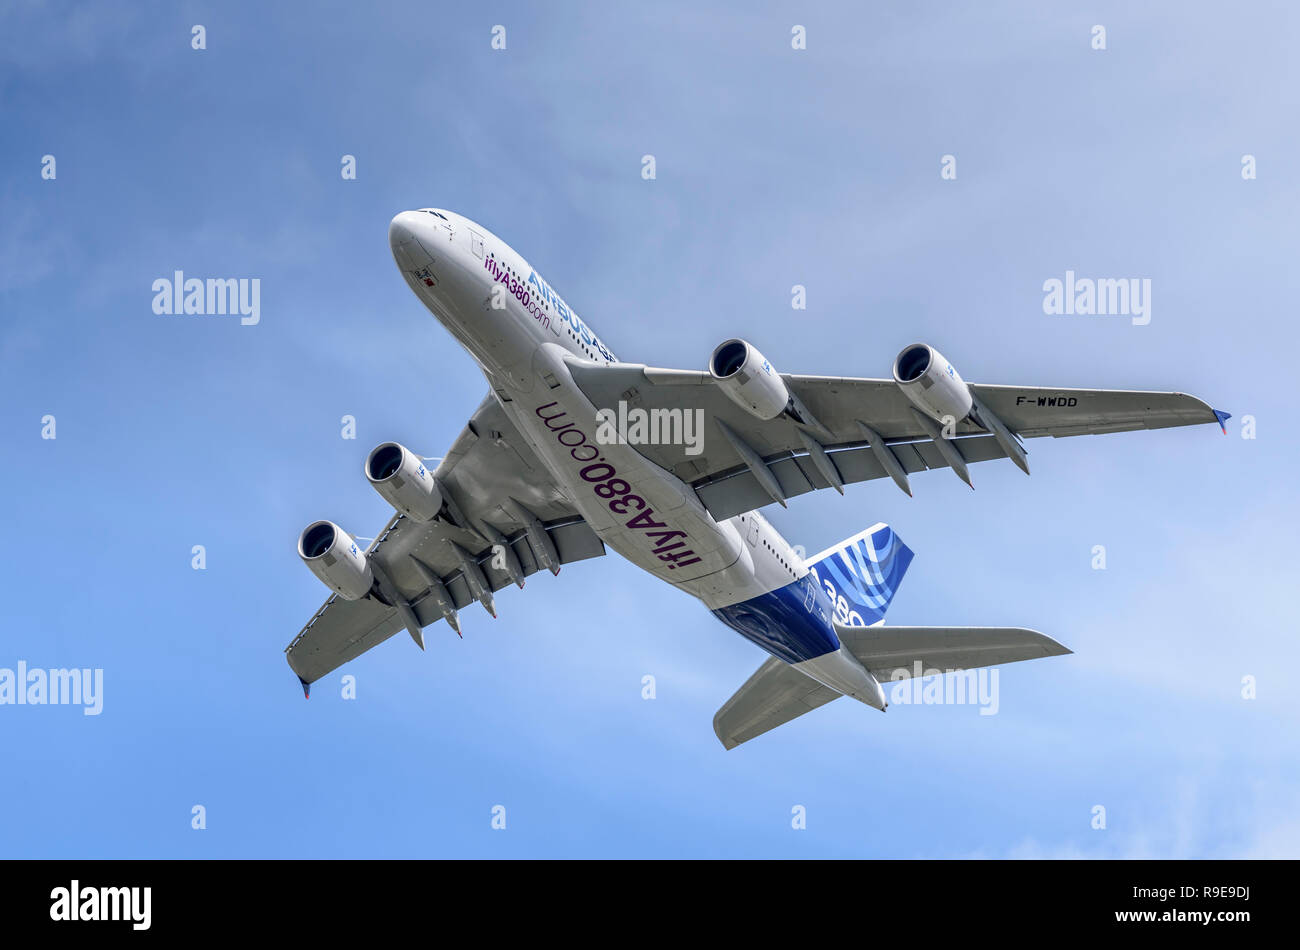 Airbus A380 passenger airliner shows its underside and flight control surfaces during a clean pass from right to left. Stock Photo